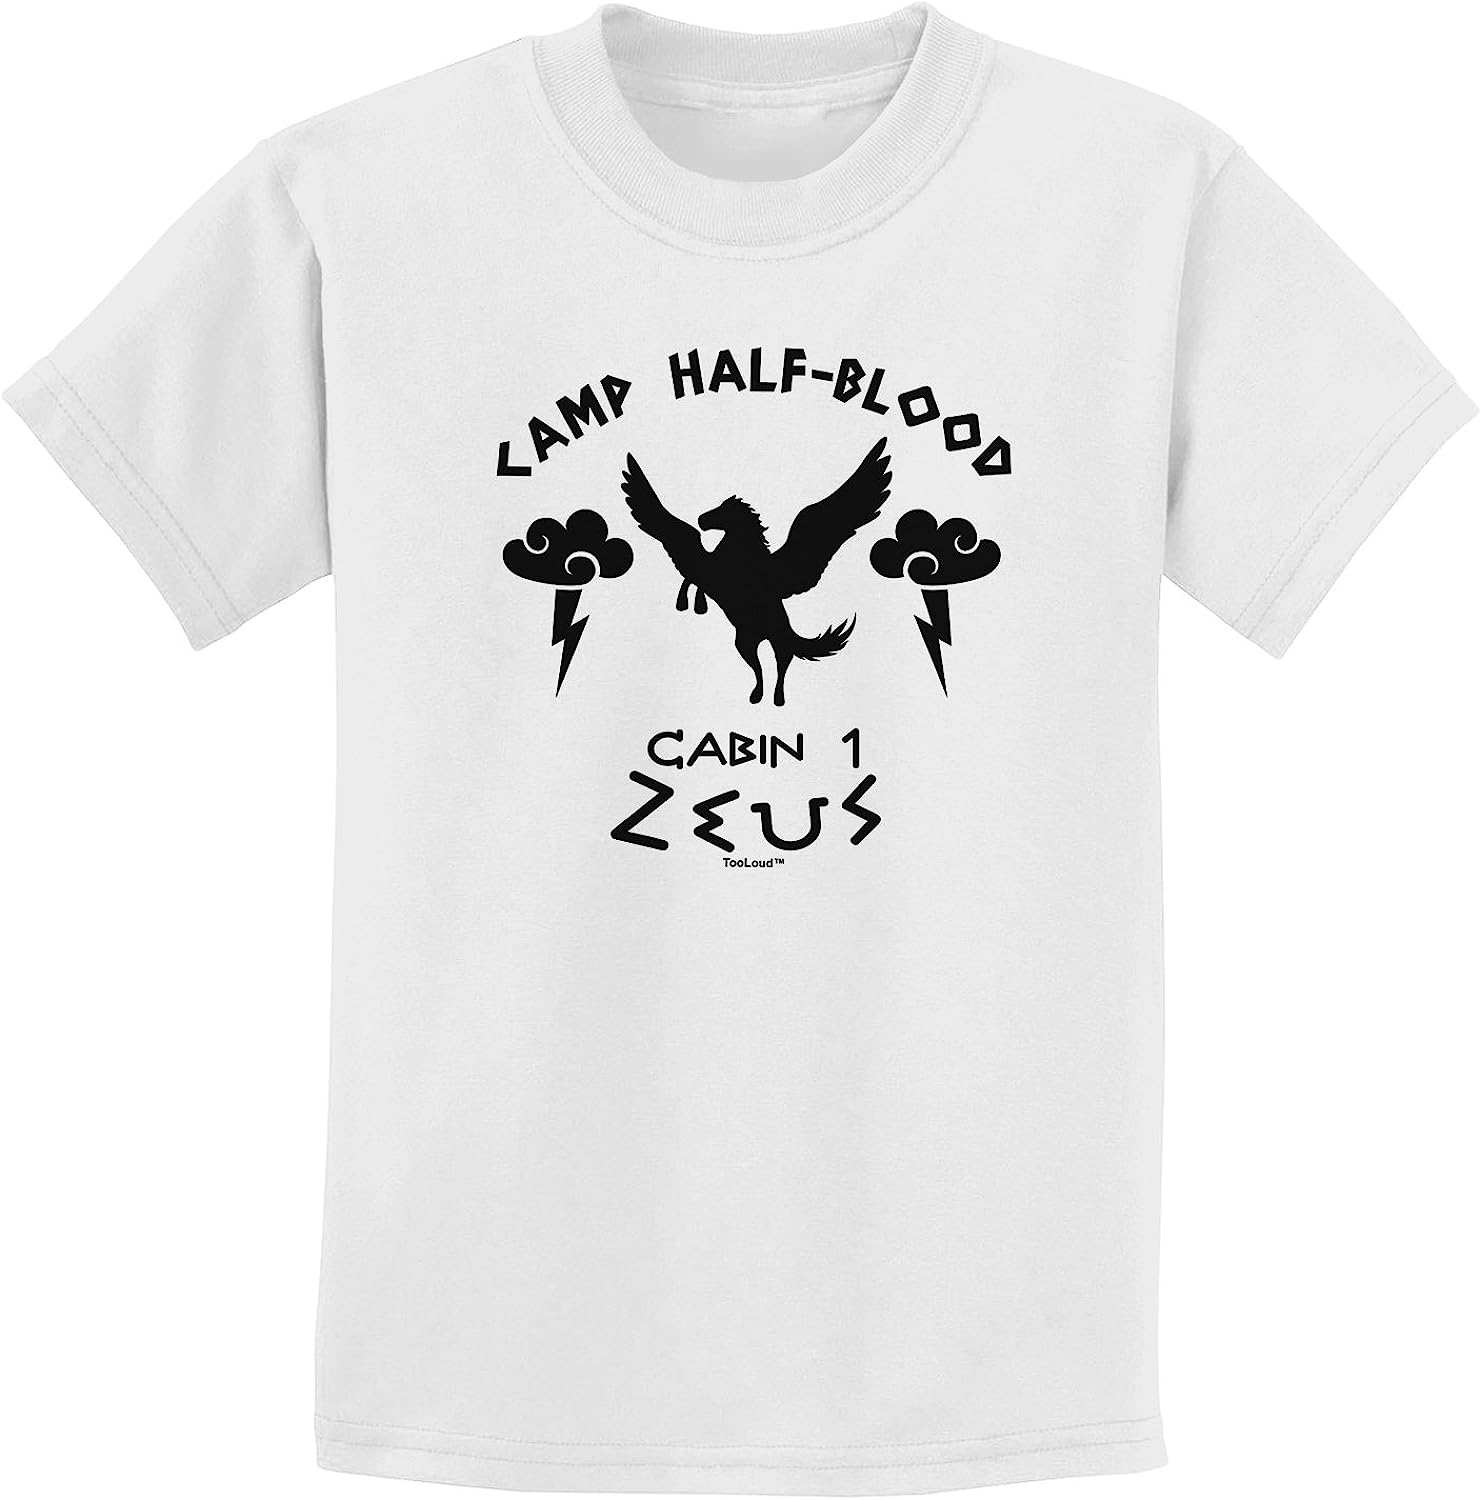 Zeus Adult T-Shirt from Camp Half Blood Cabin 1 - A Must-Have for Fans of  TooLoud